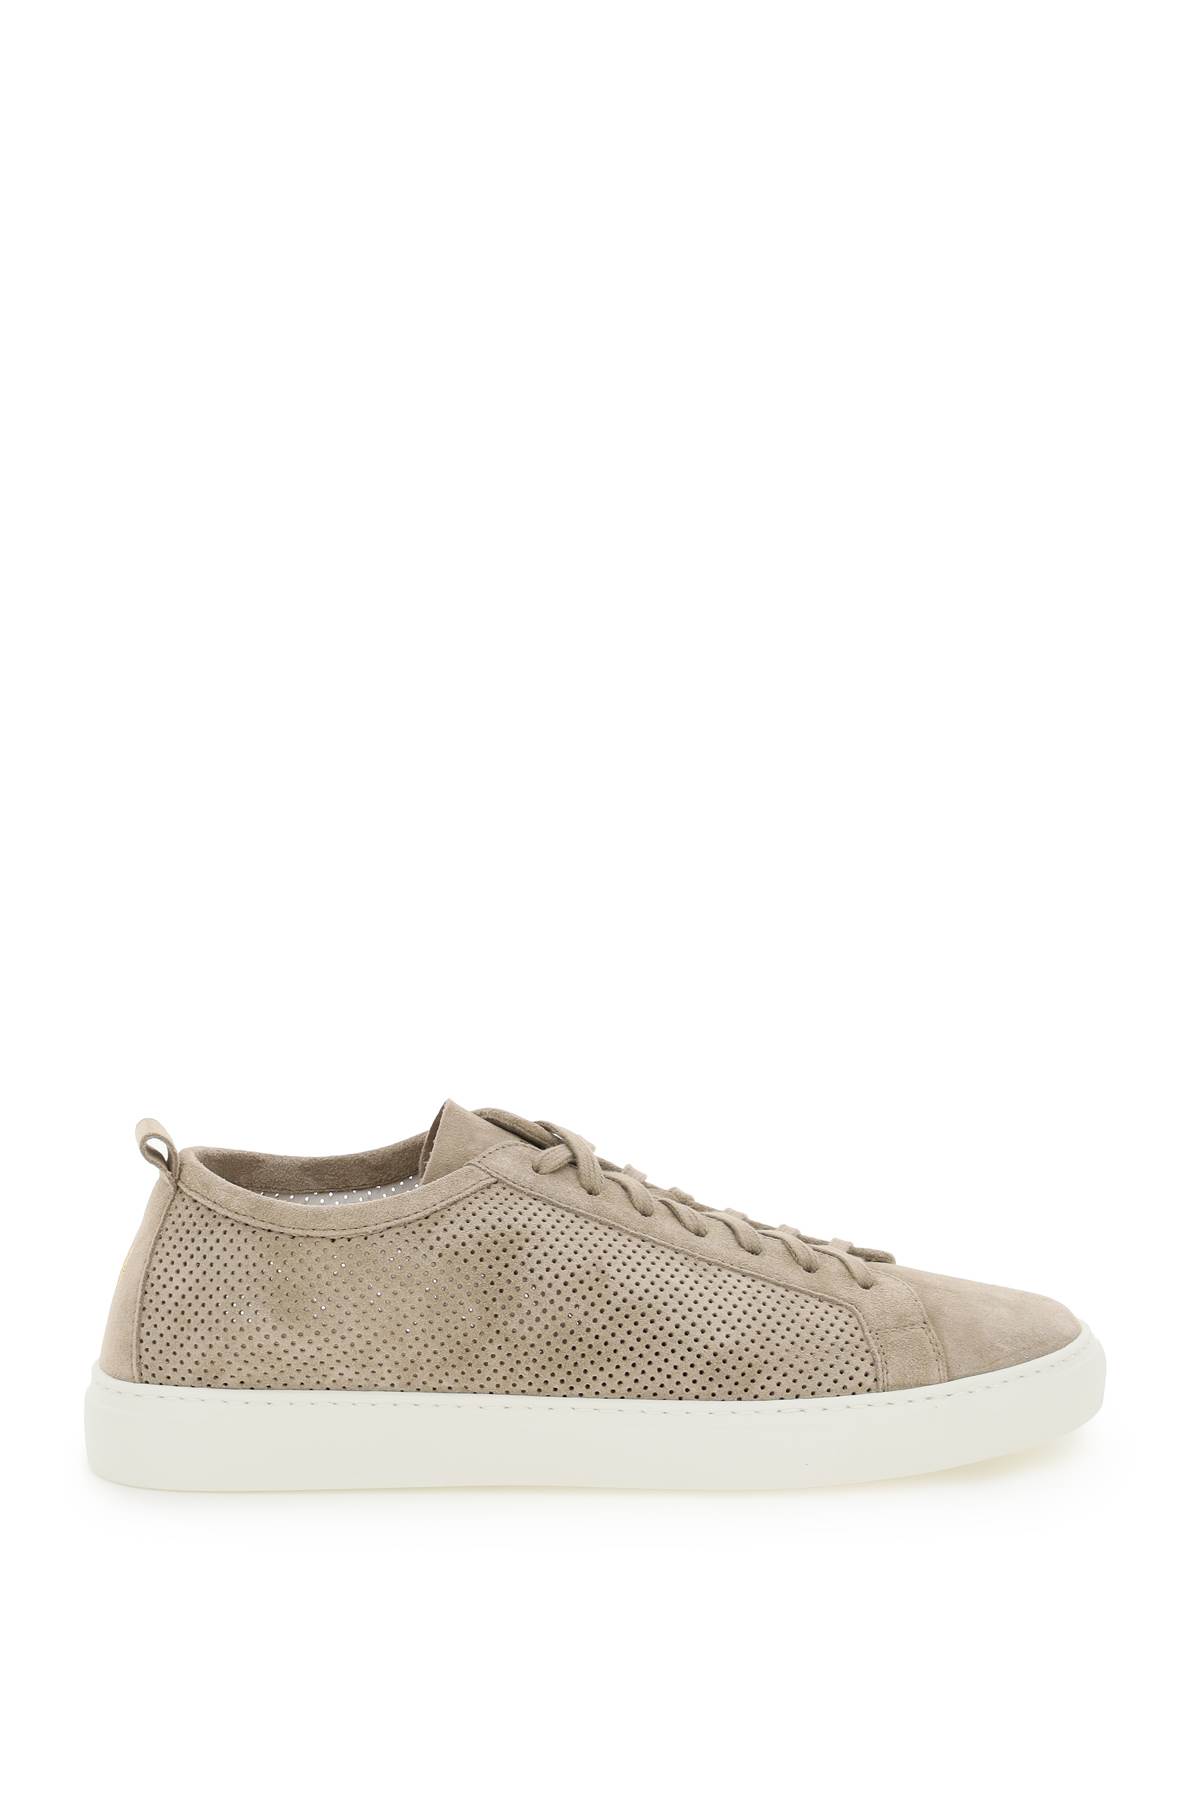 Henderson Baracco Roby Perforated Suede Sneakers